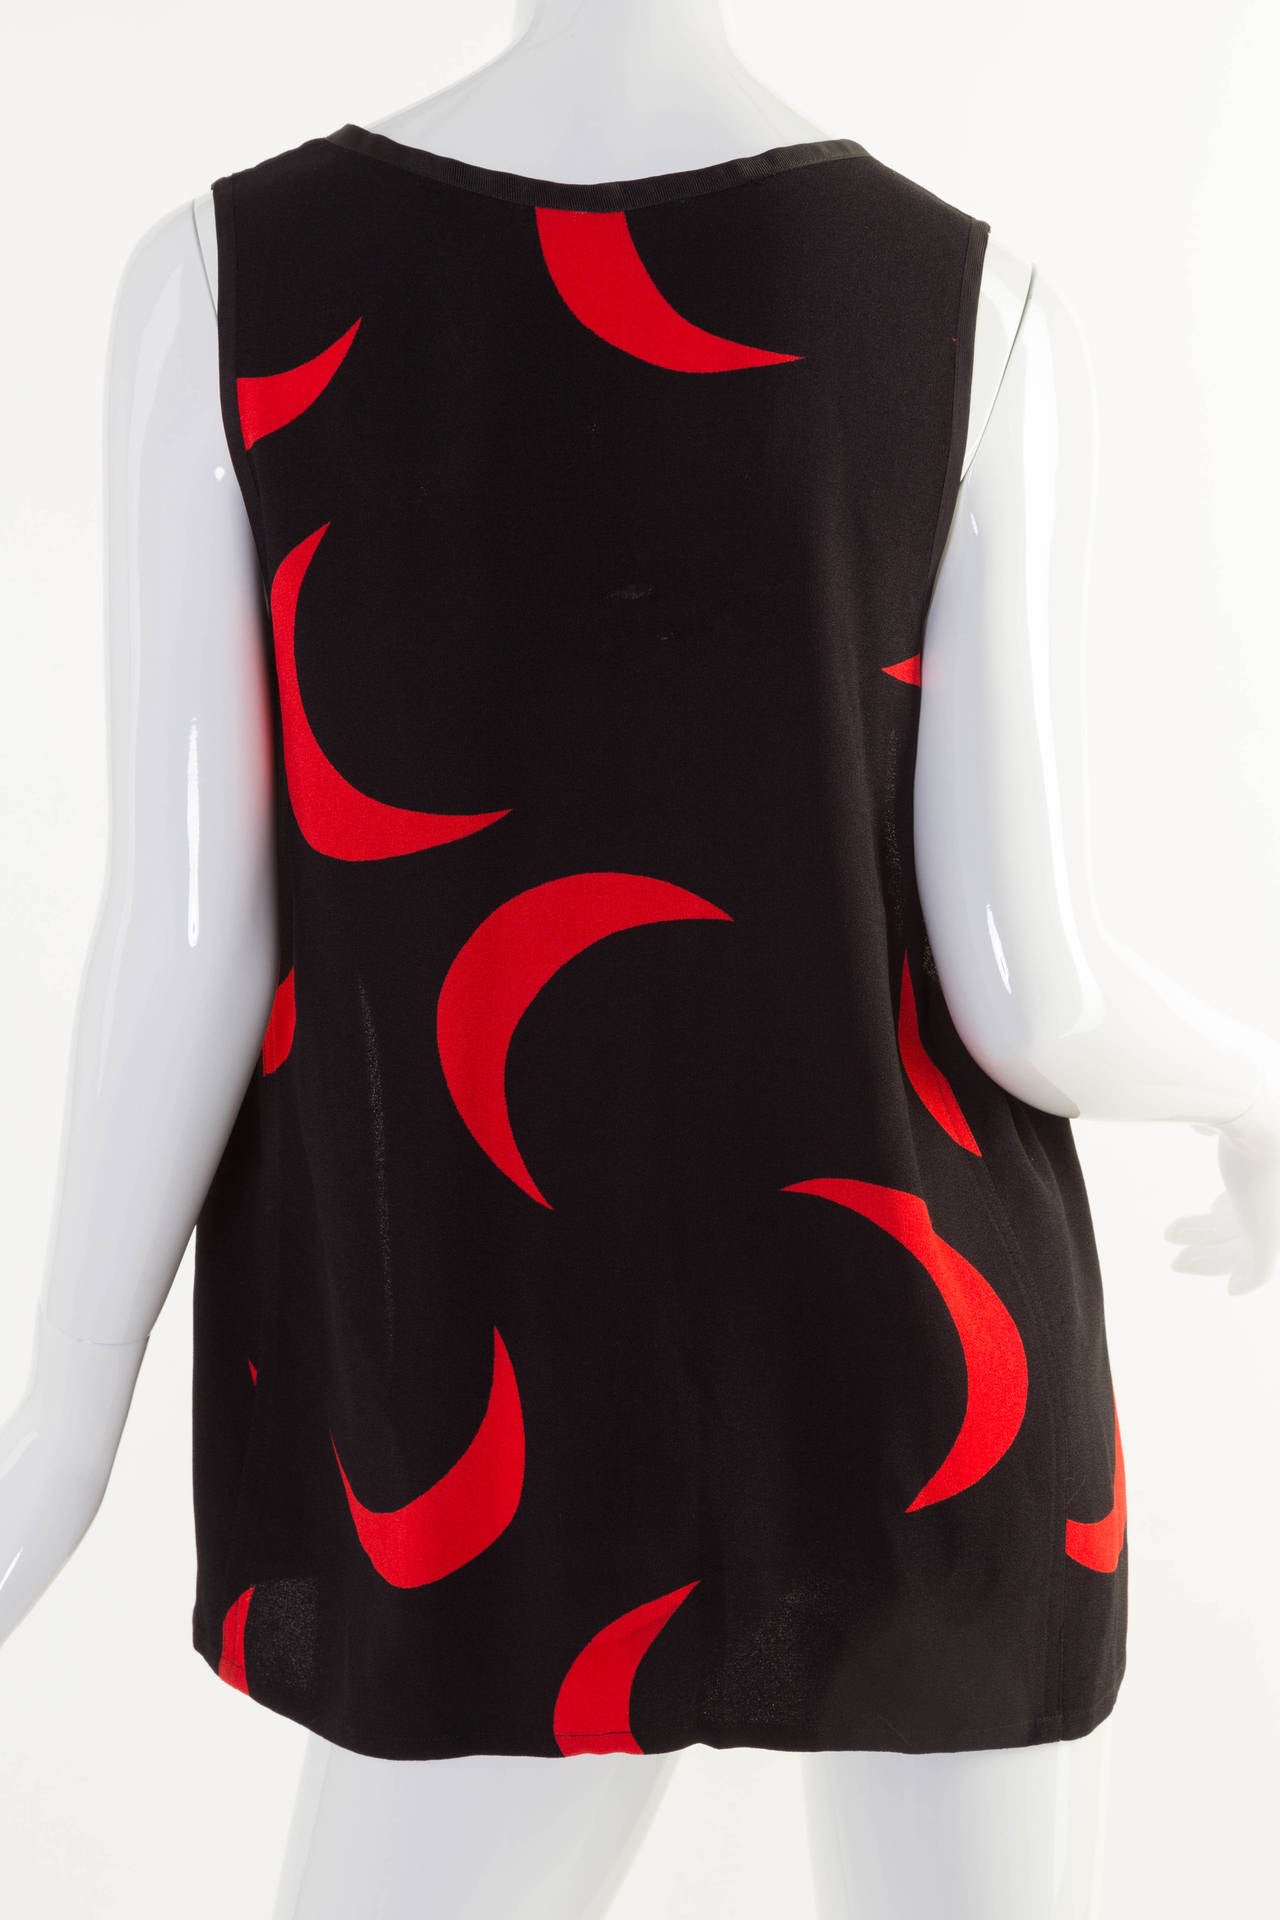 Vintage Saint Laurent black sleeveless with red moons open front vest. This is from the 1978 collection. 
Please see the last image with a moon dress from the 1978 YSL collection.
The fabric is unknown.
Measurements:
Bust:  30